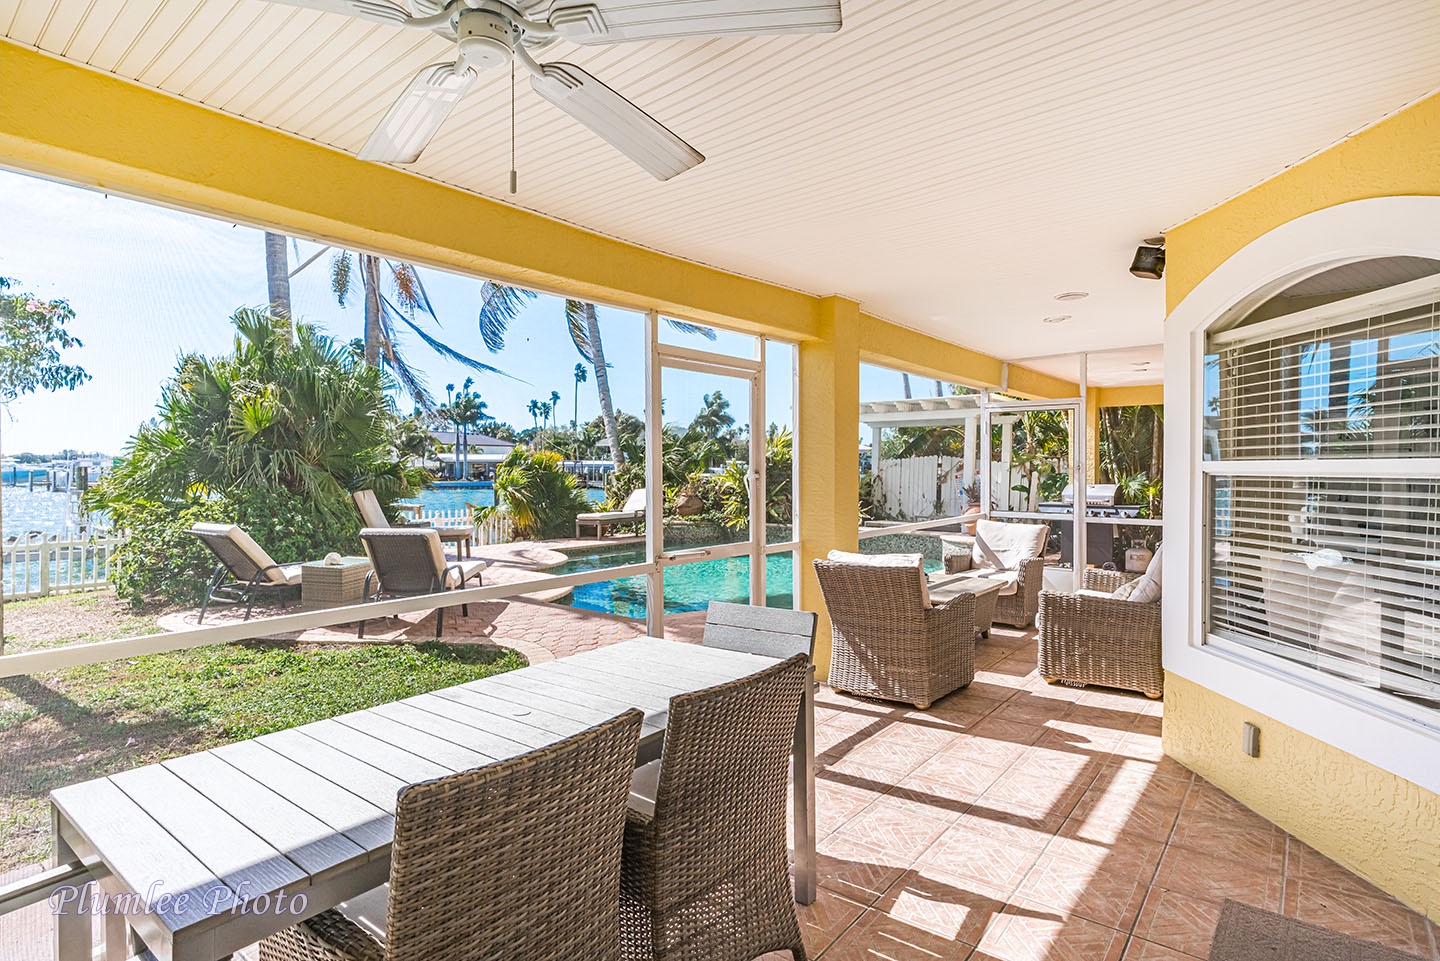 There's plenty of room for entertaining on the screened in lanai.